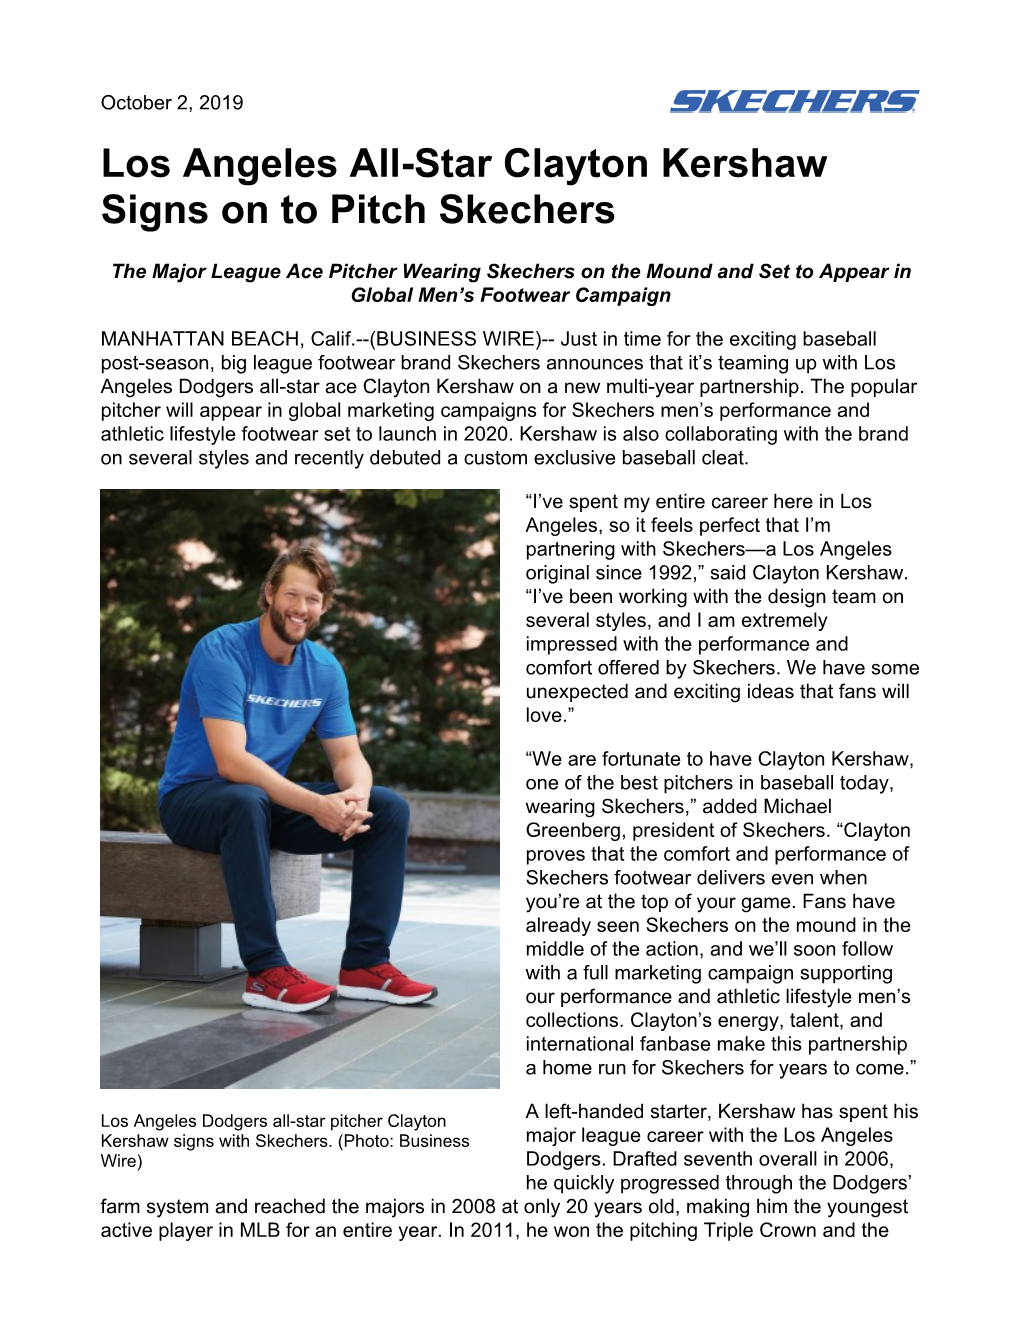 Los Angeles All-Star Clayton Kershaw Signs on to Pitch Skechers